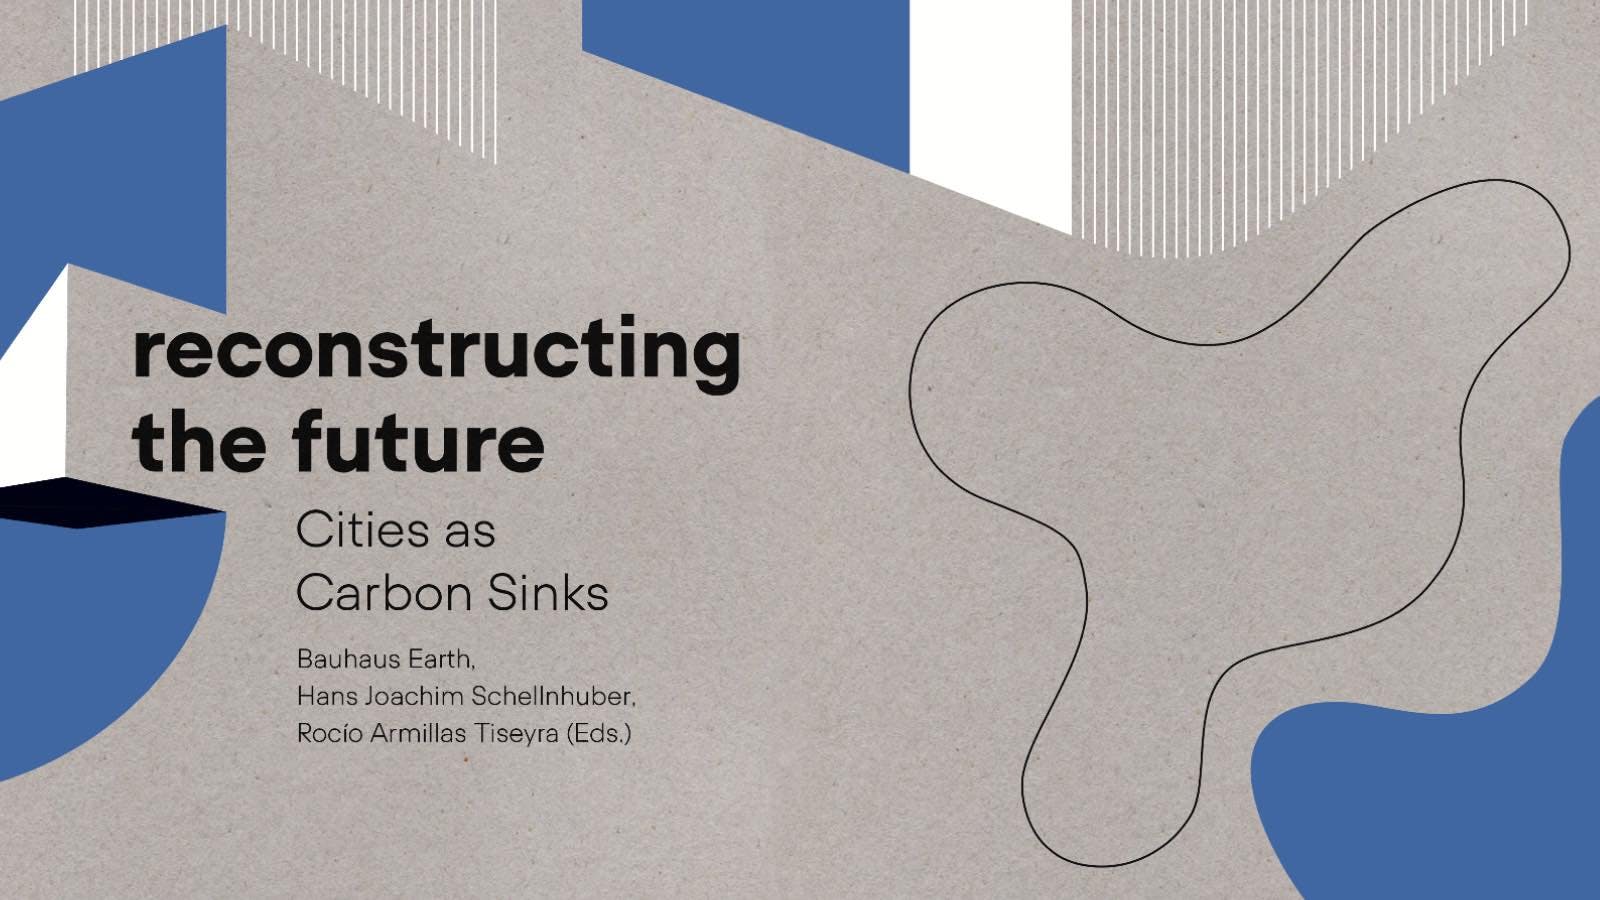 Bauhaus Earth Book Out Now “Reconstructing the Future: Cities as Carbon Sinks”